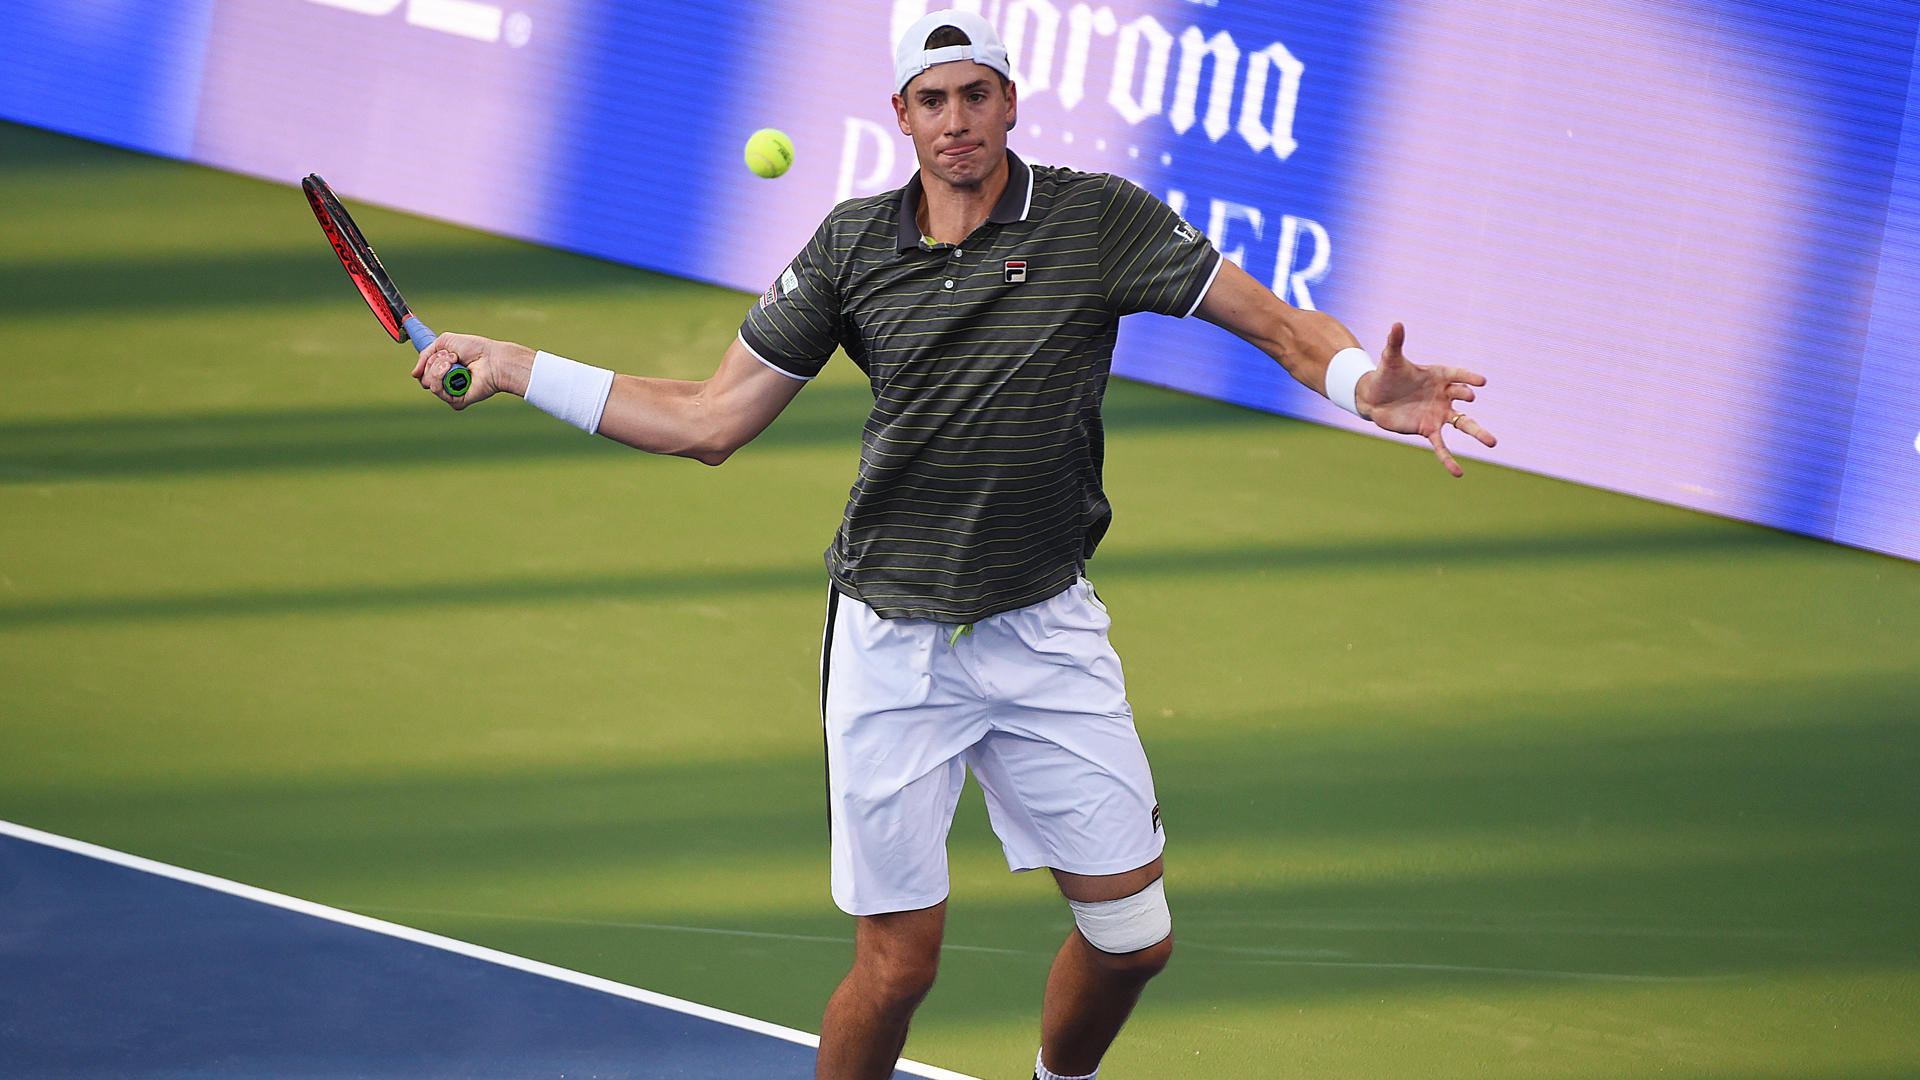 Dominant at the Atlanta Open previously, John Isner was downed by Reilly Opelka in the second round.